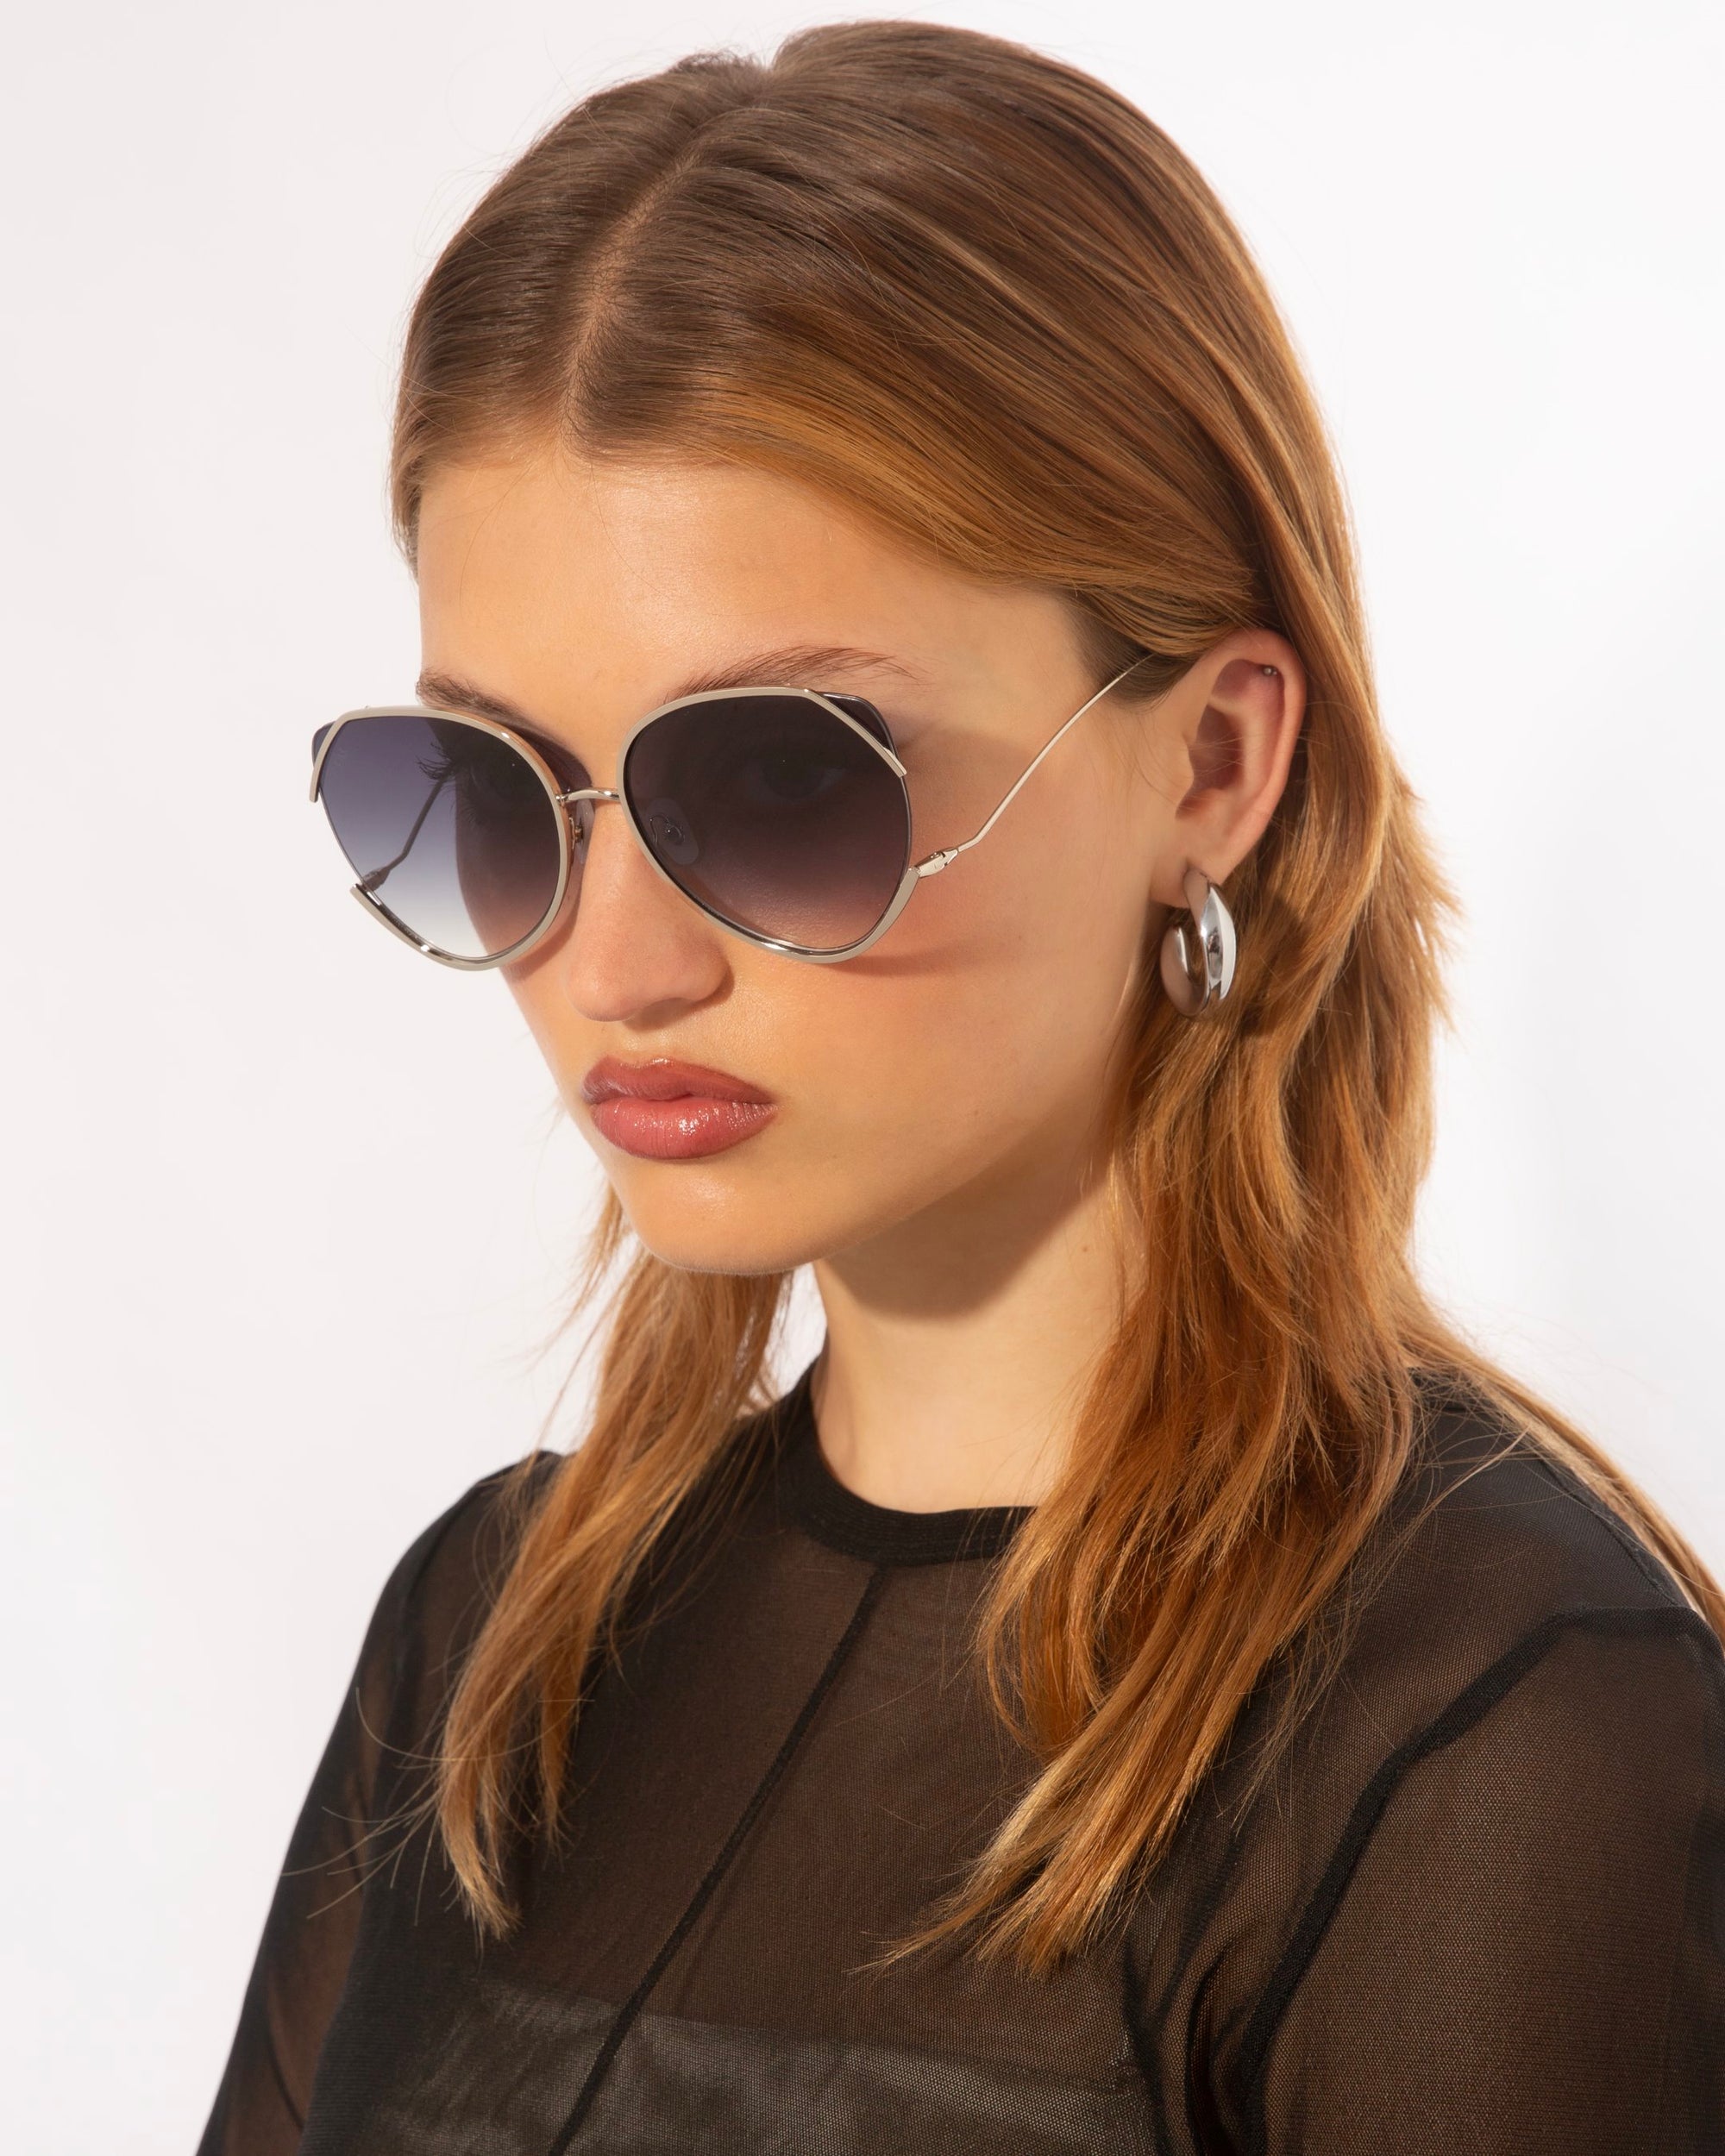 A woman with reddish-brown hair is wearing large, hexagonal For Art&#39;s Sake® Wonderland sunglasses featuring jadestone nose pads and offering 100% UV protection. She has hoop earrings and is dressed in a sheer black top with a solid black panel covering her torso. The background is plain white.